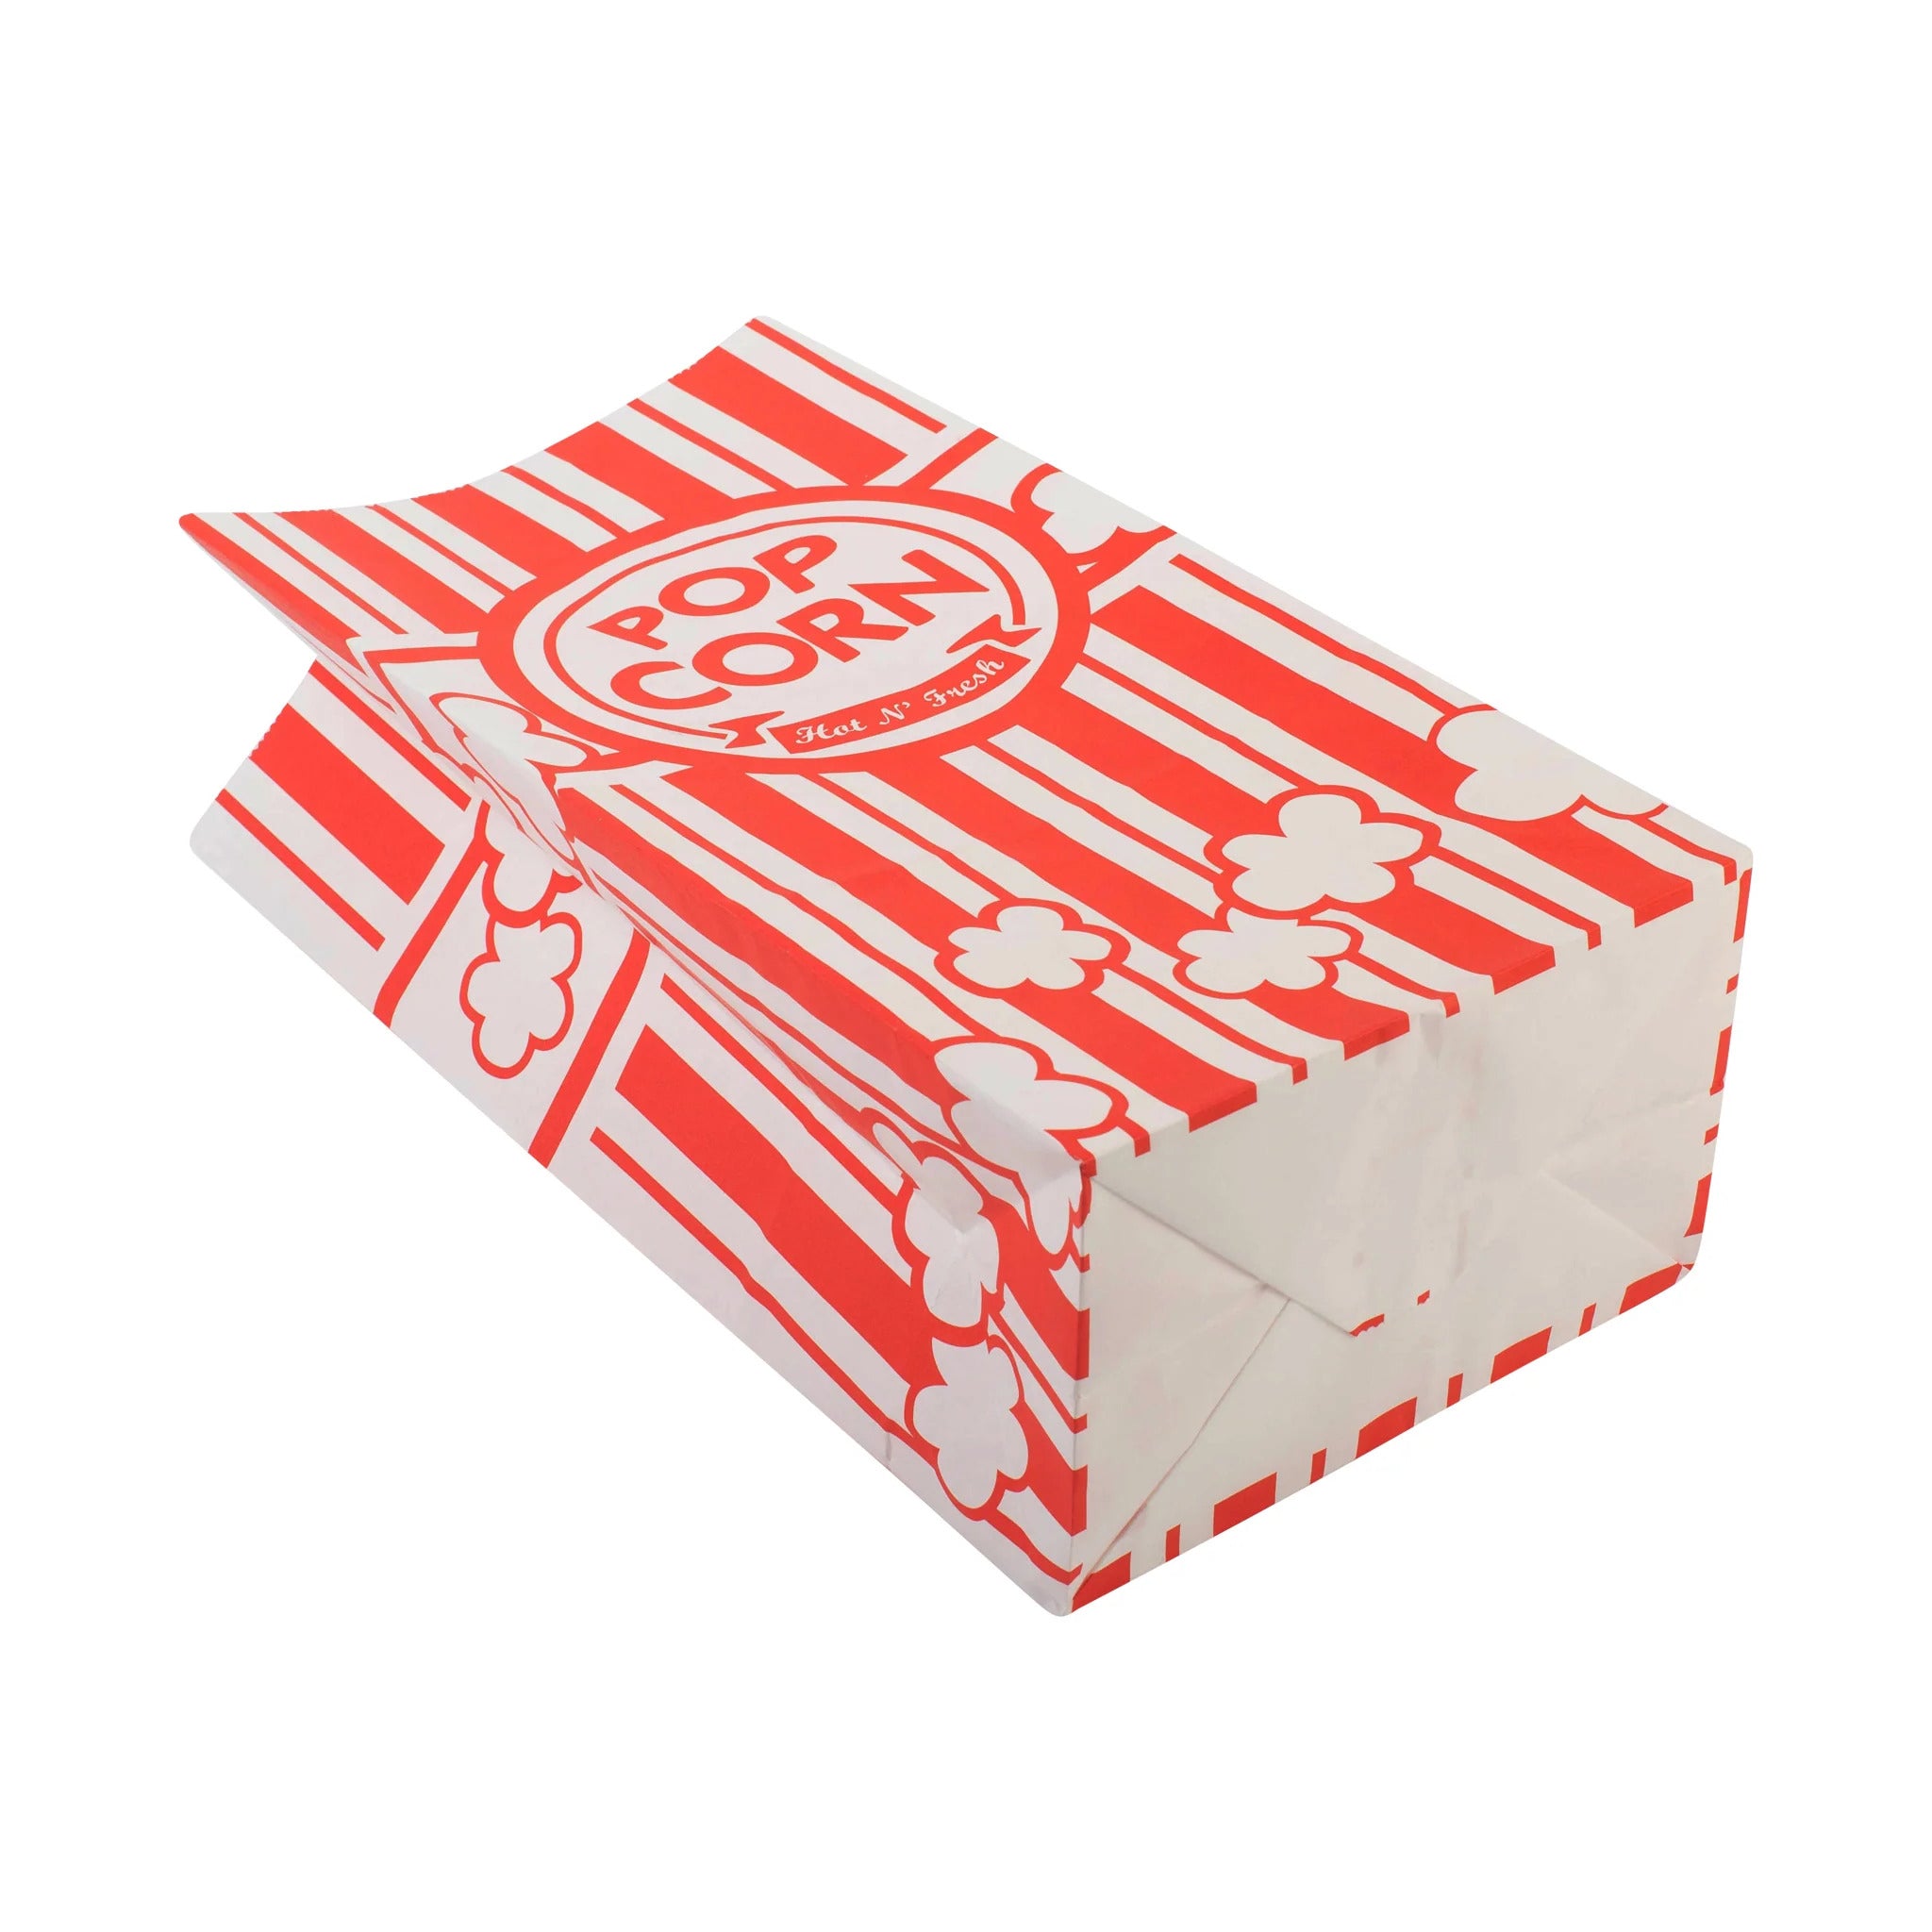 130oz Single Ply Popcorn Bags (Pack of 500)